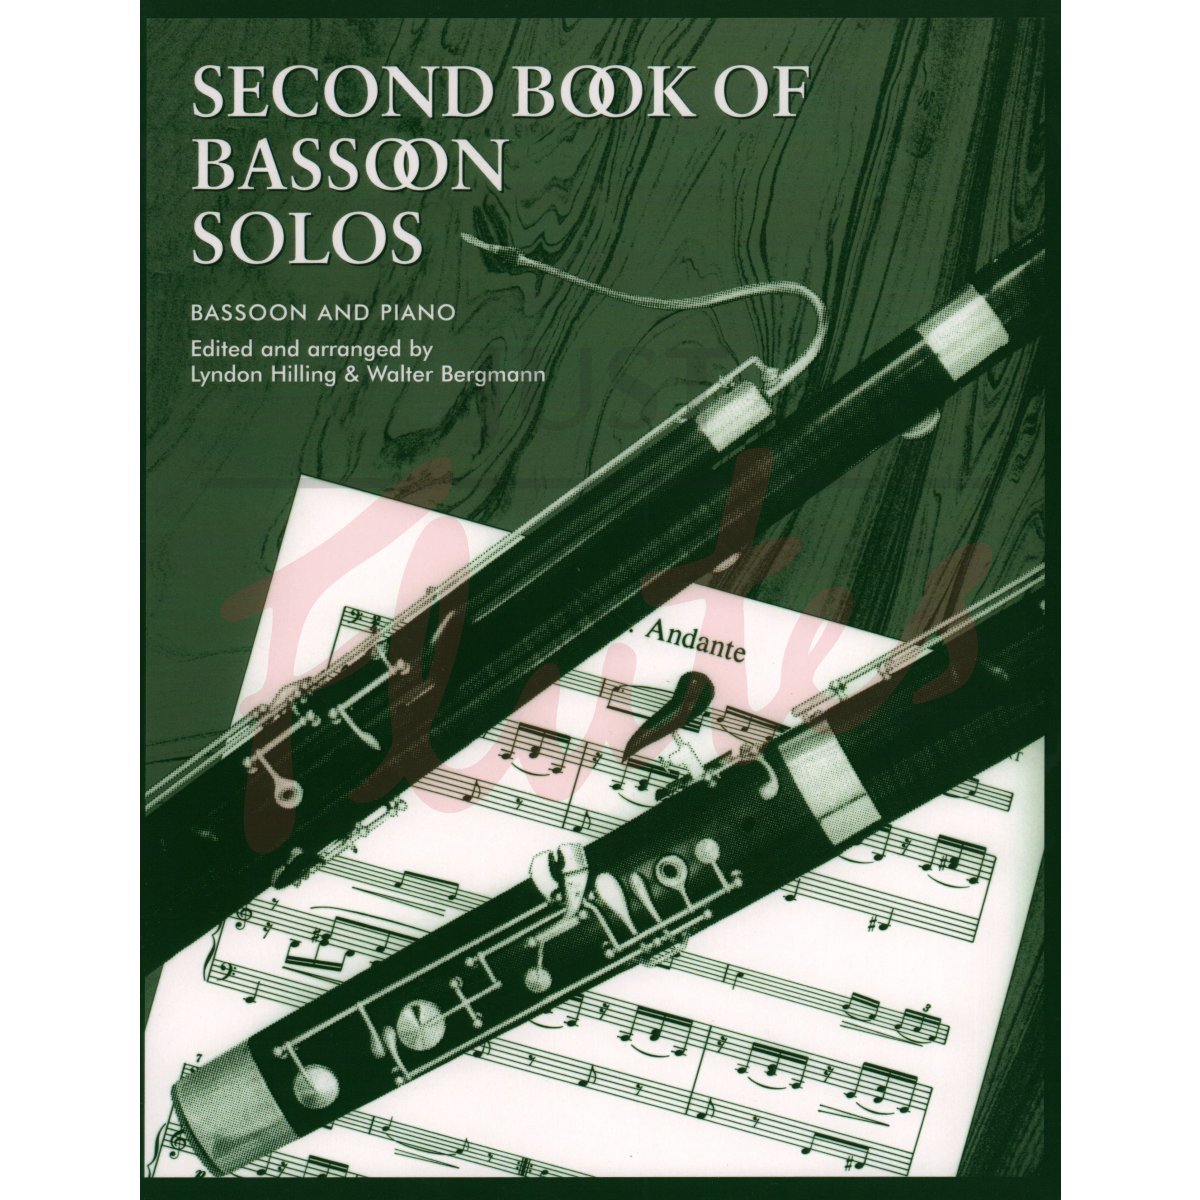 Second Book of Bassoon Solos